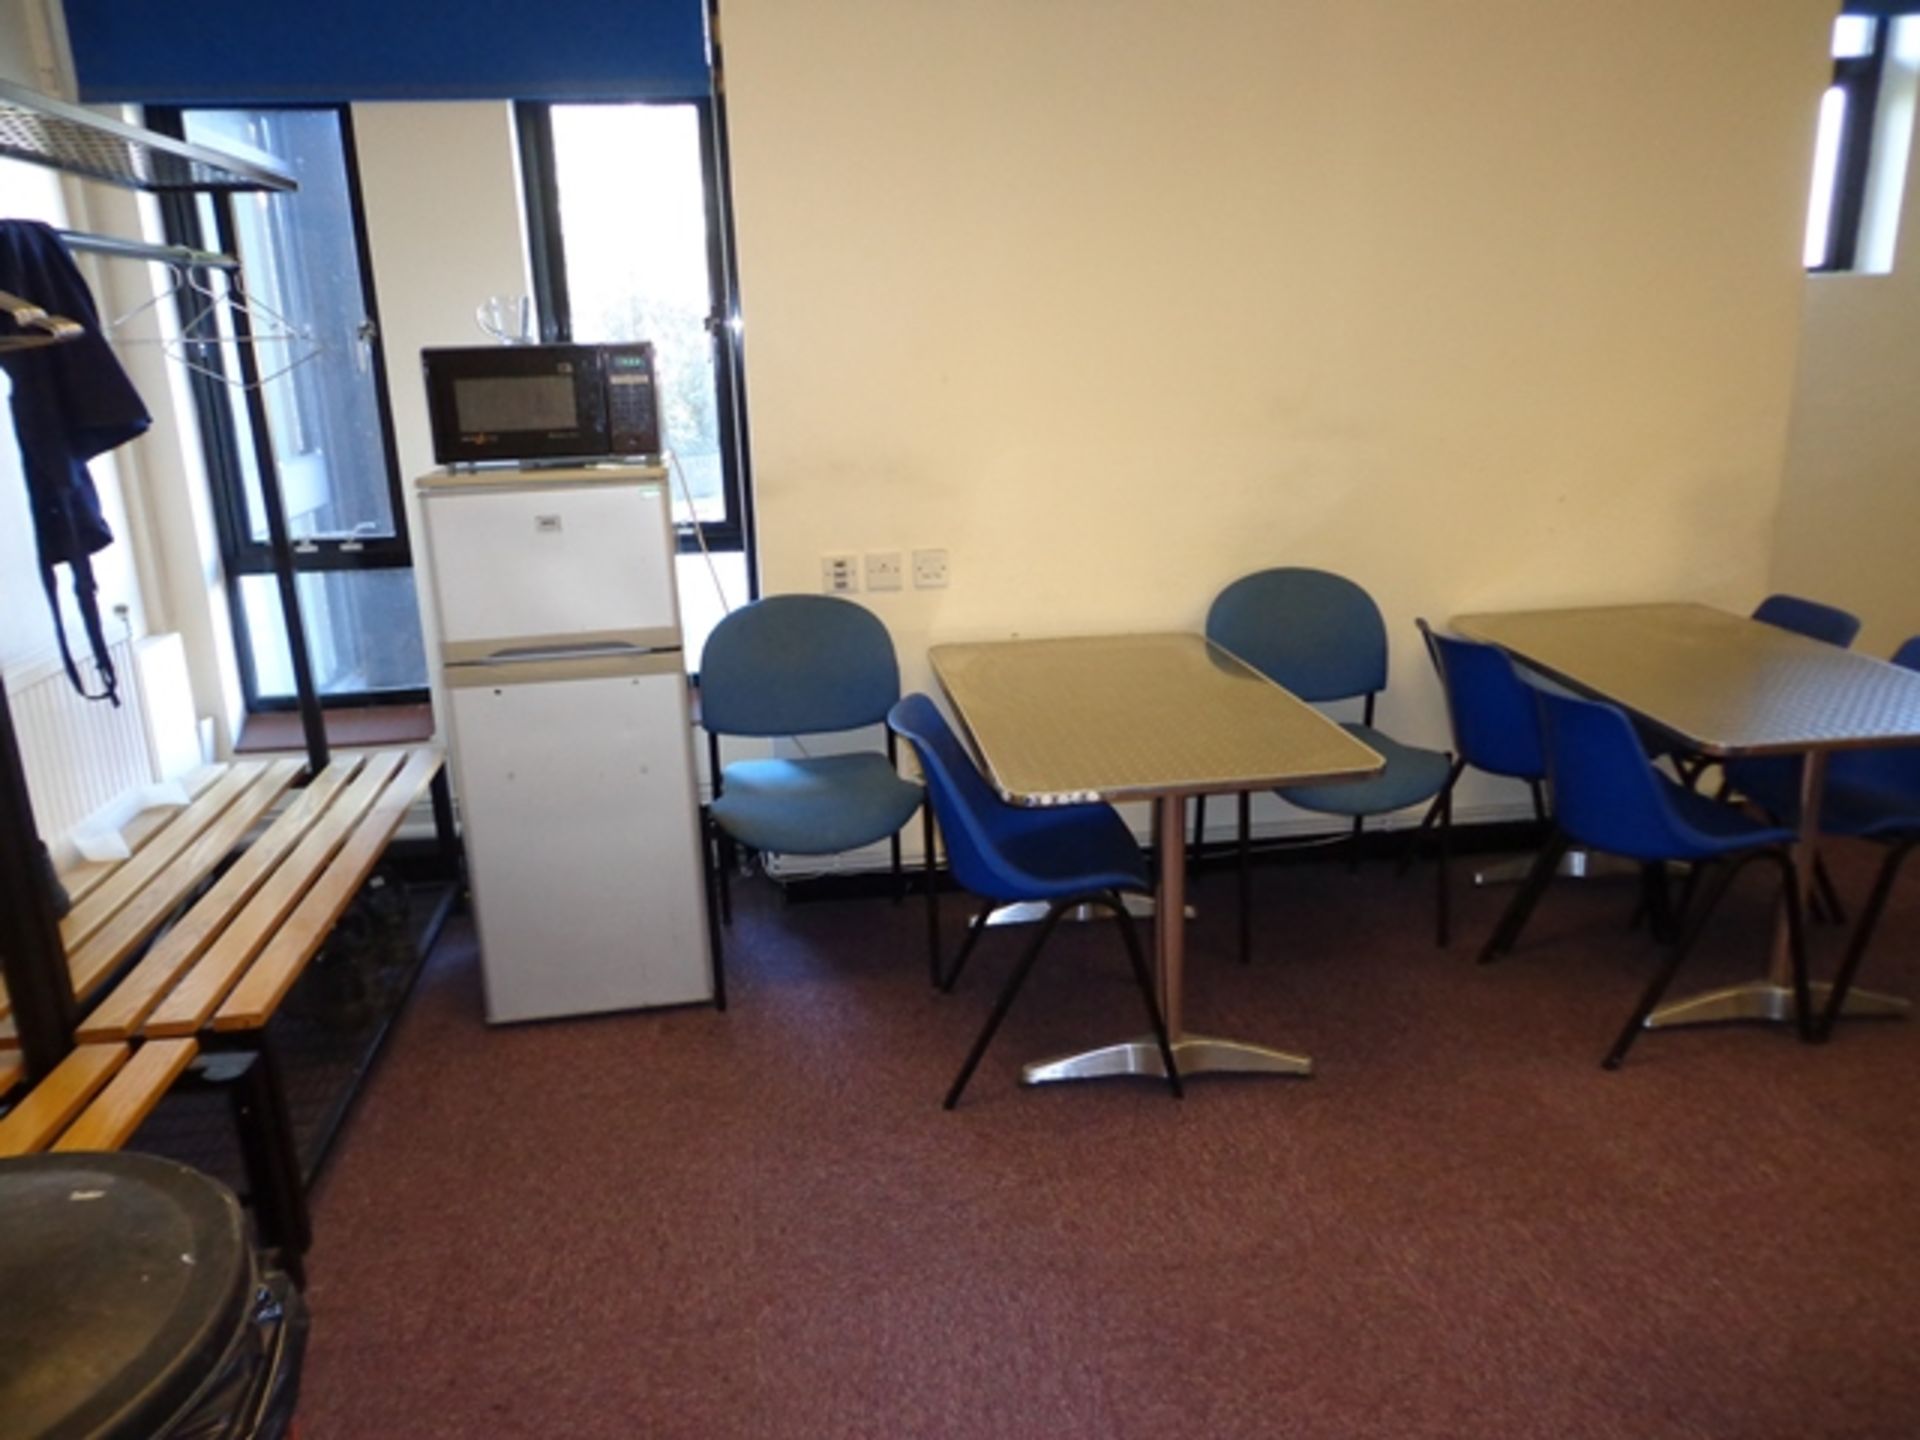 Contents to Room including Tables, Chairs and Changing Benches - Image 2 of 3